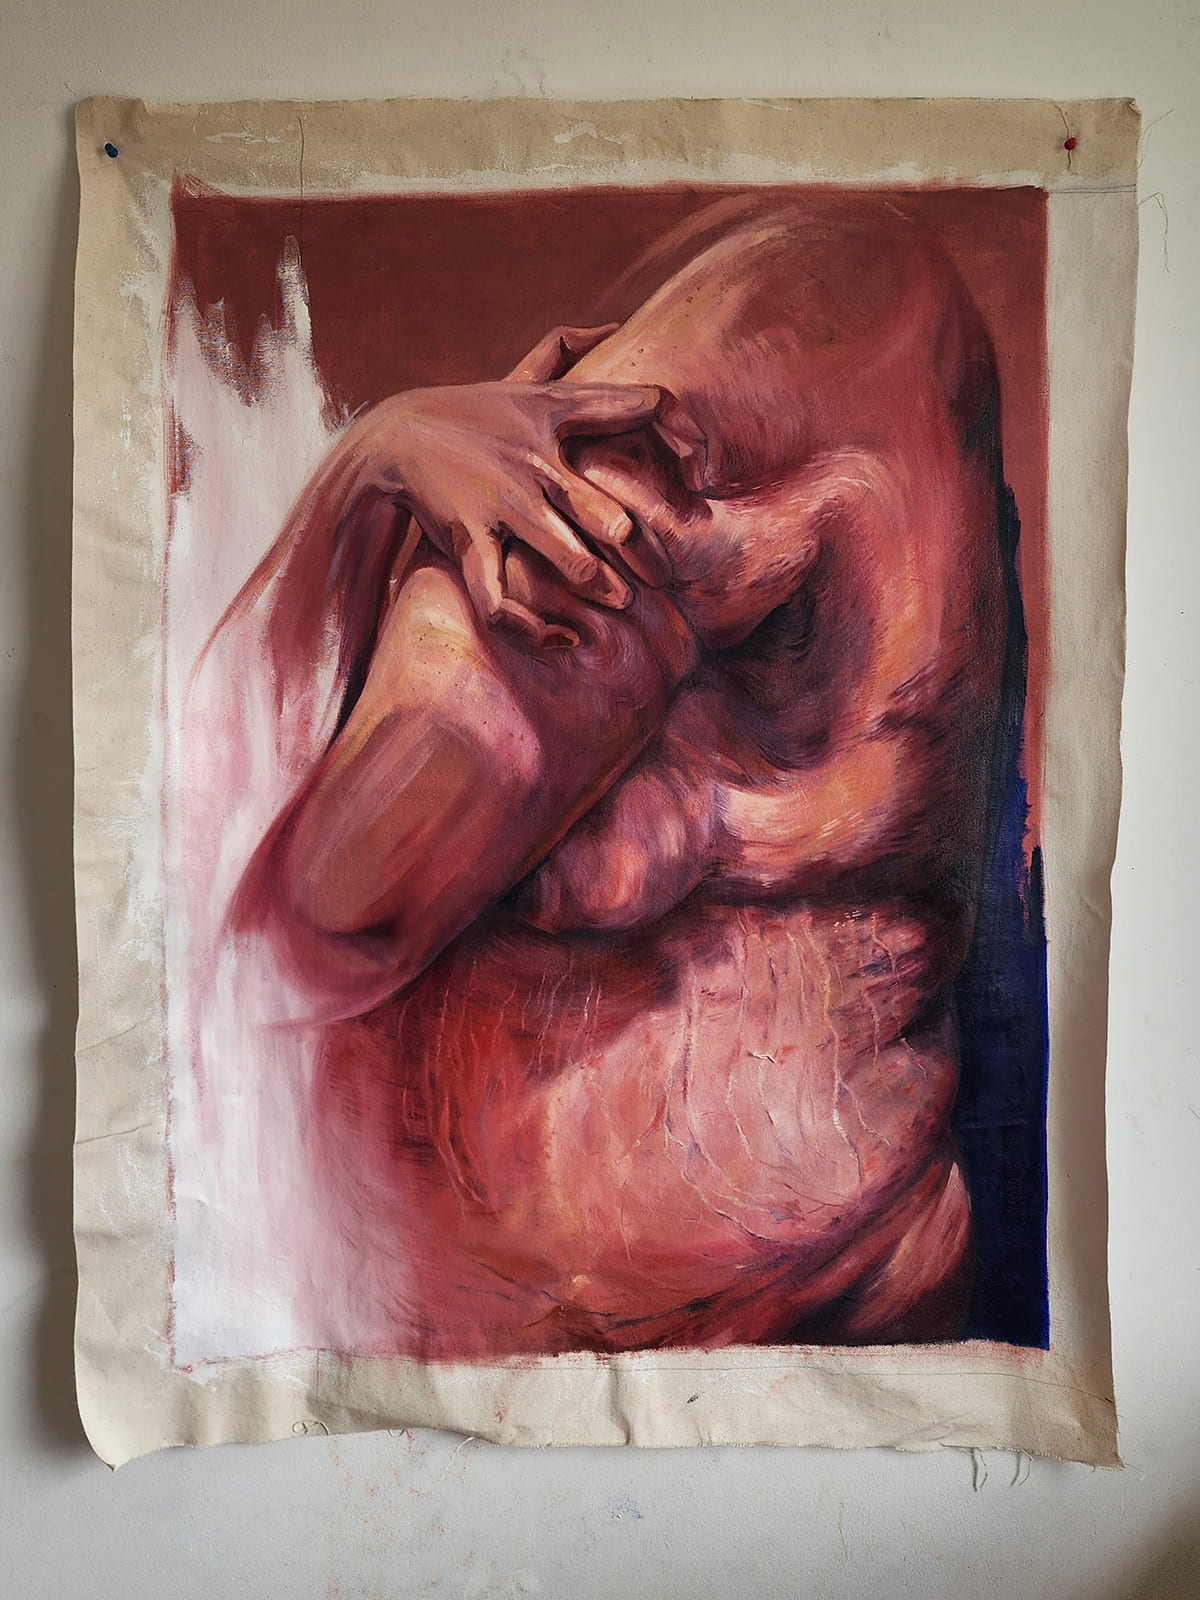 An oil painting of a person's body.